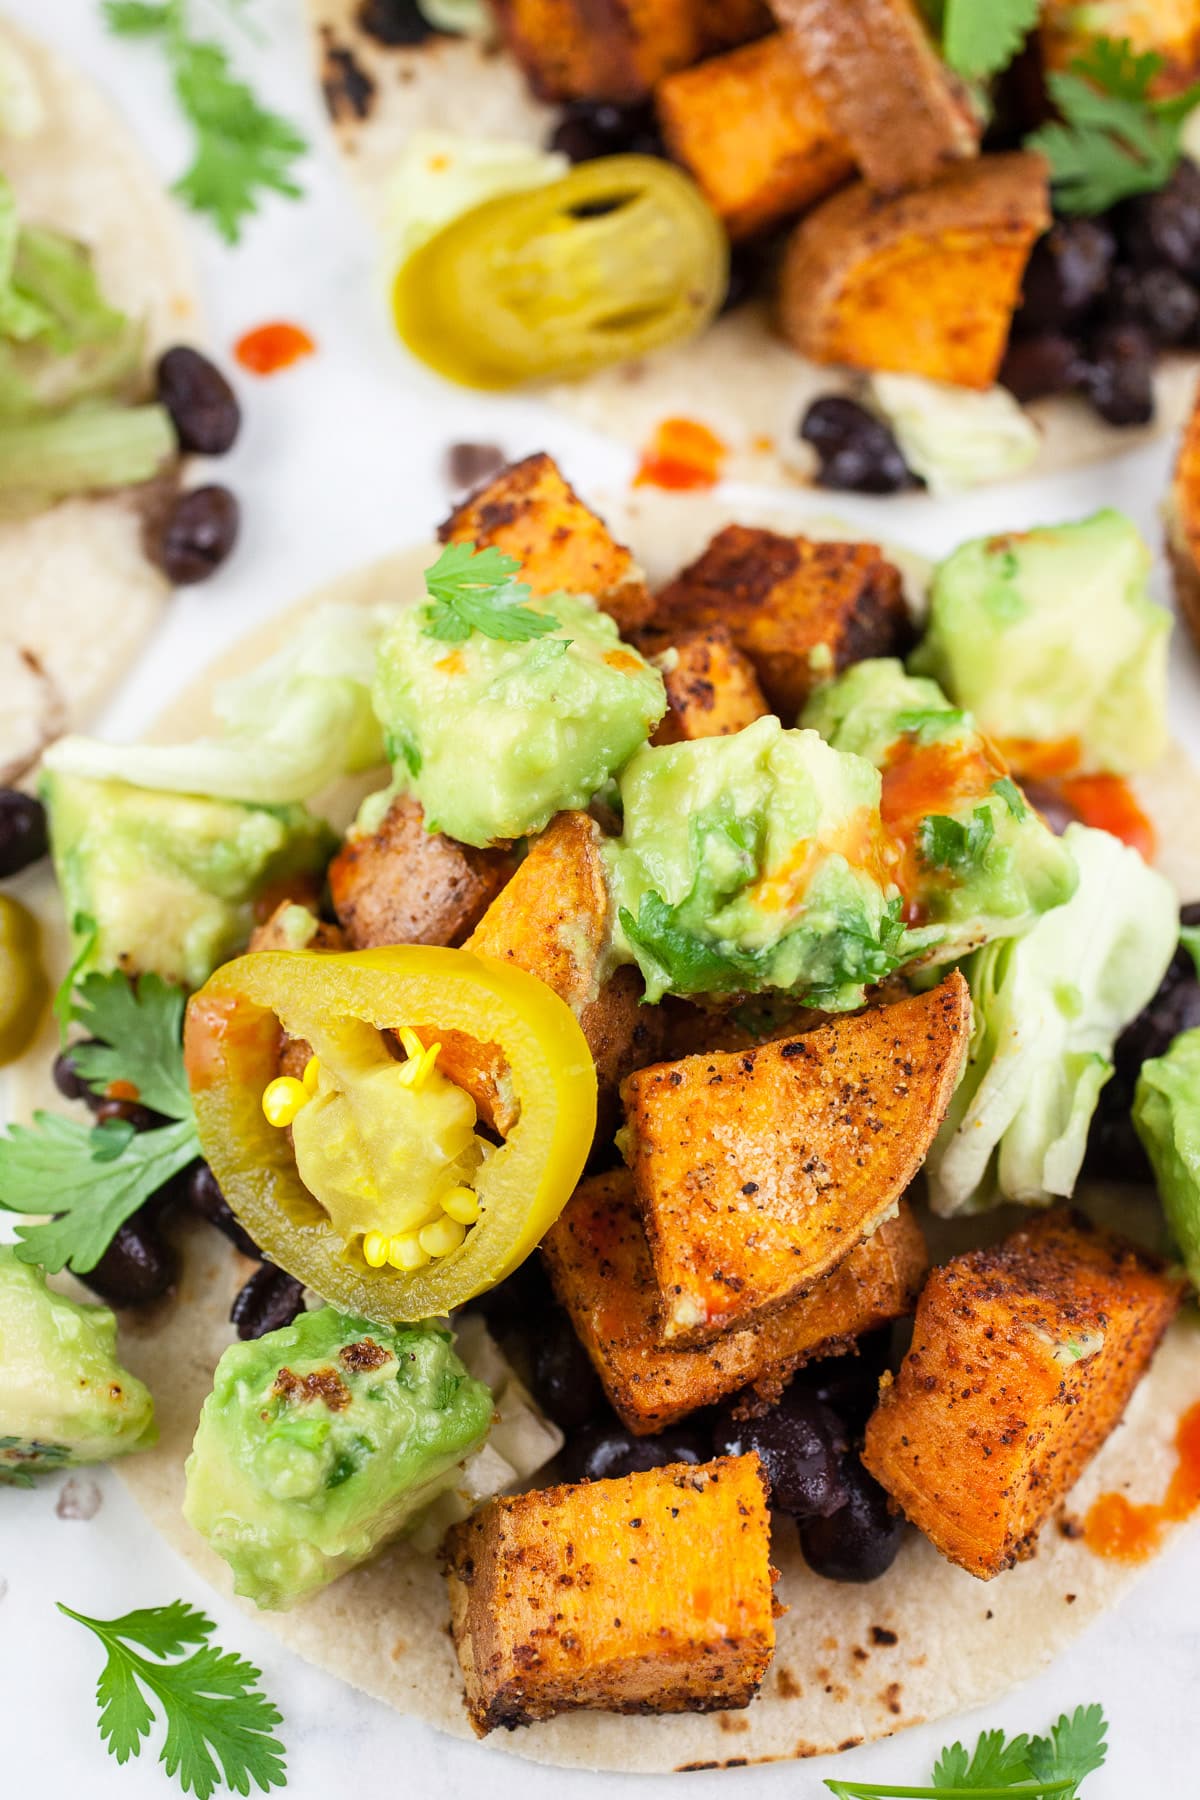 Roasted sweet potato tacos with black beans, avocado salsa, and pickled jalapenos.